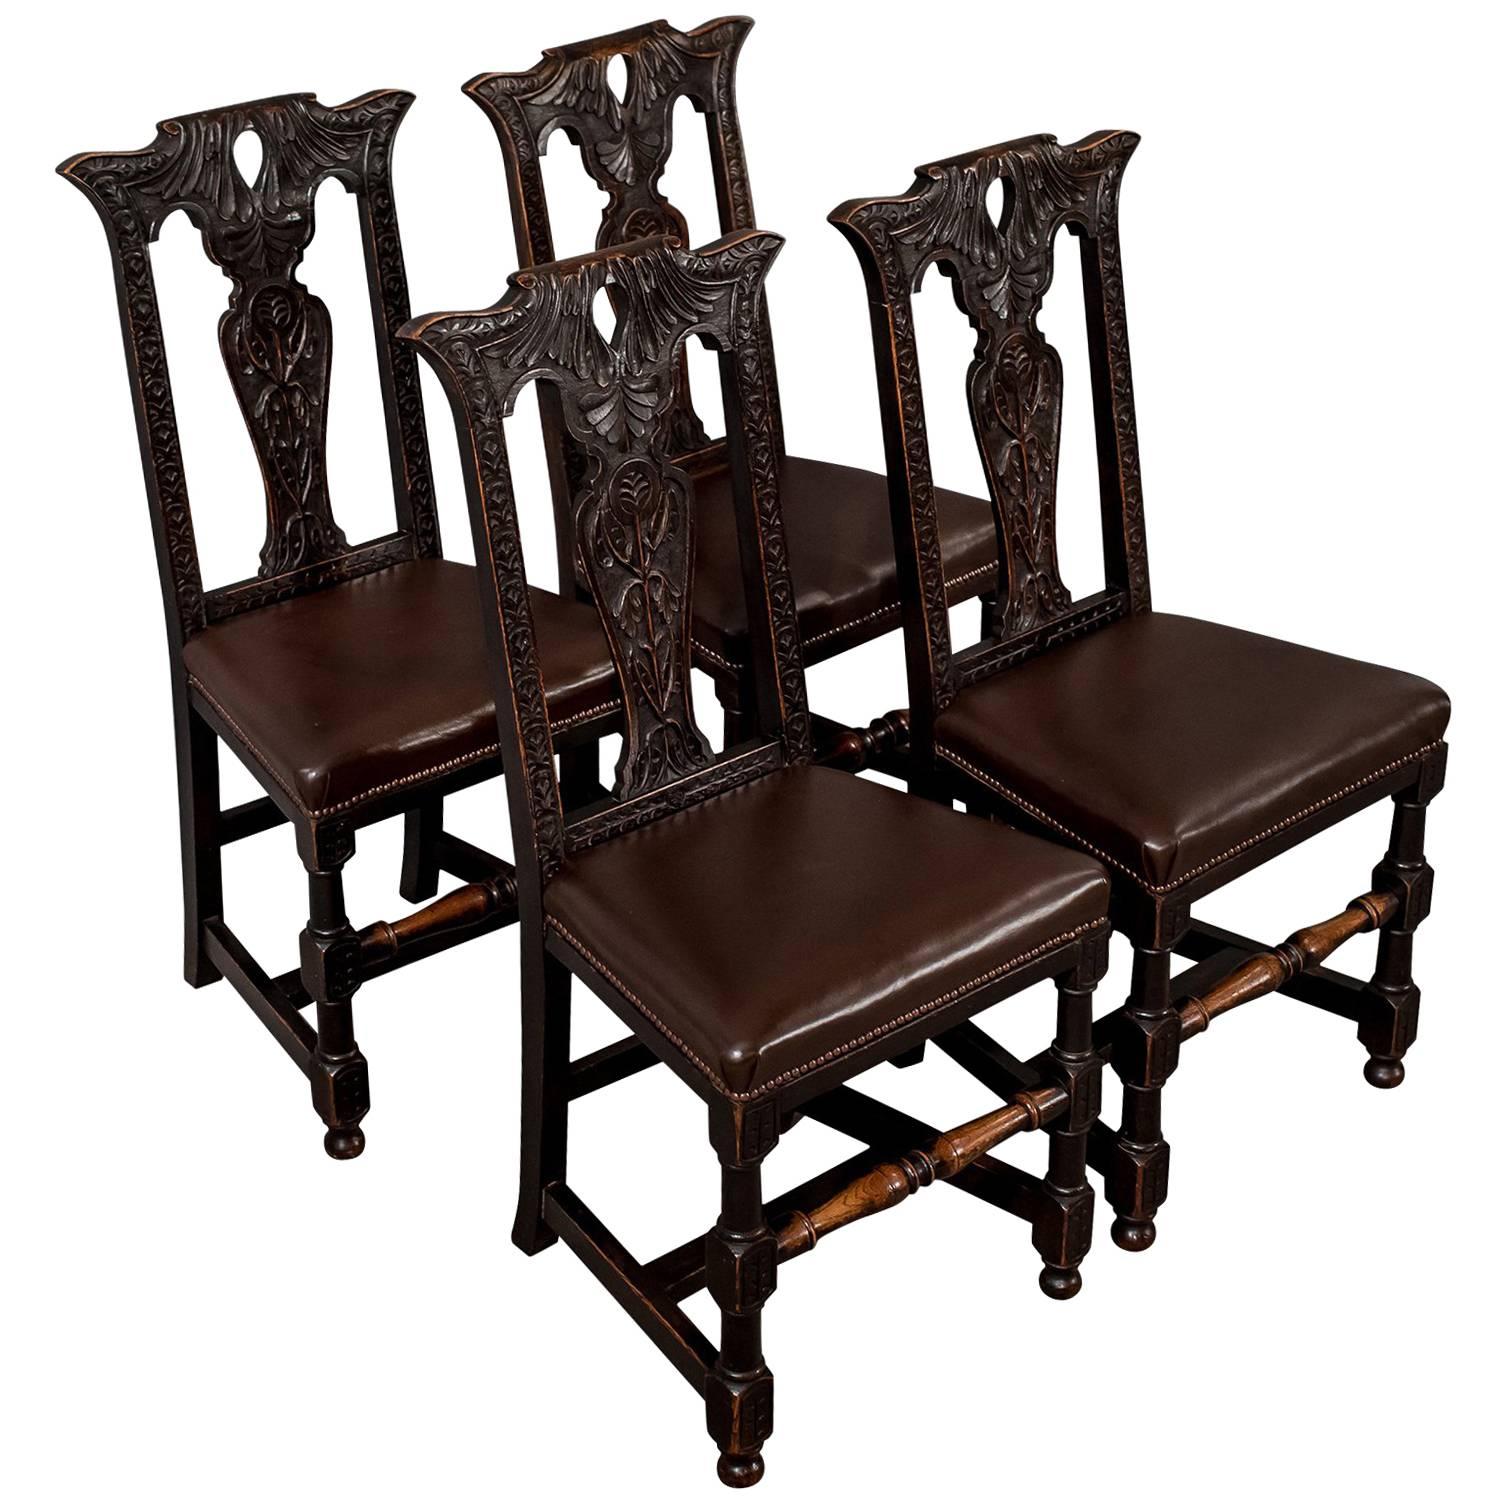 Set of Four Quality Oak Dining Chairs English Victorian Leather Seats circa 1870